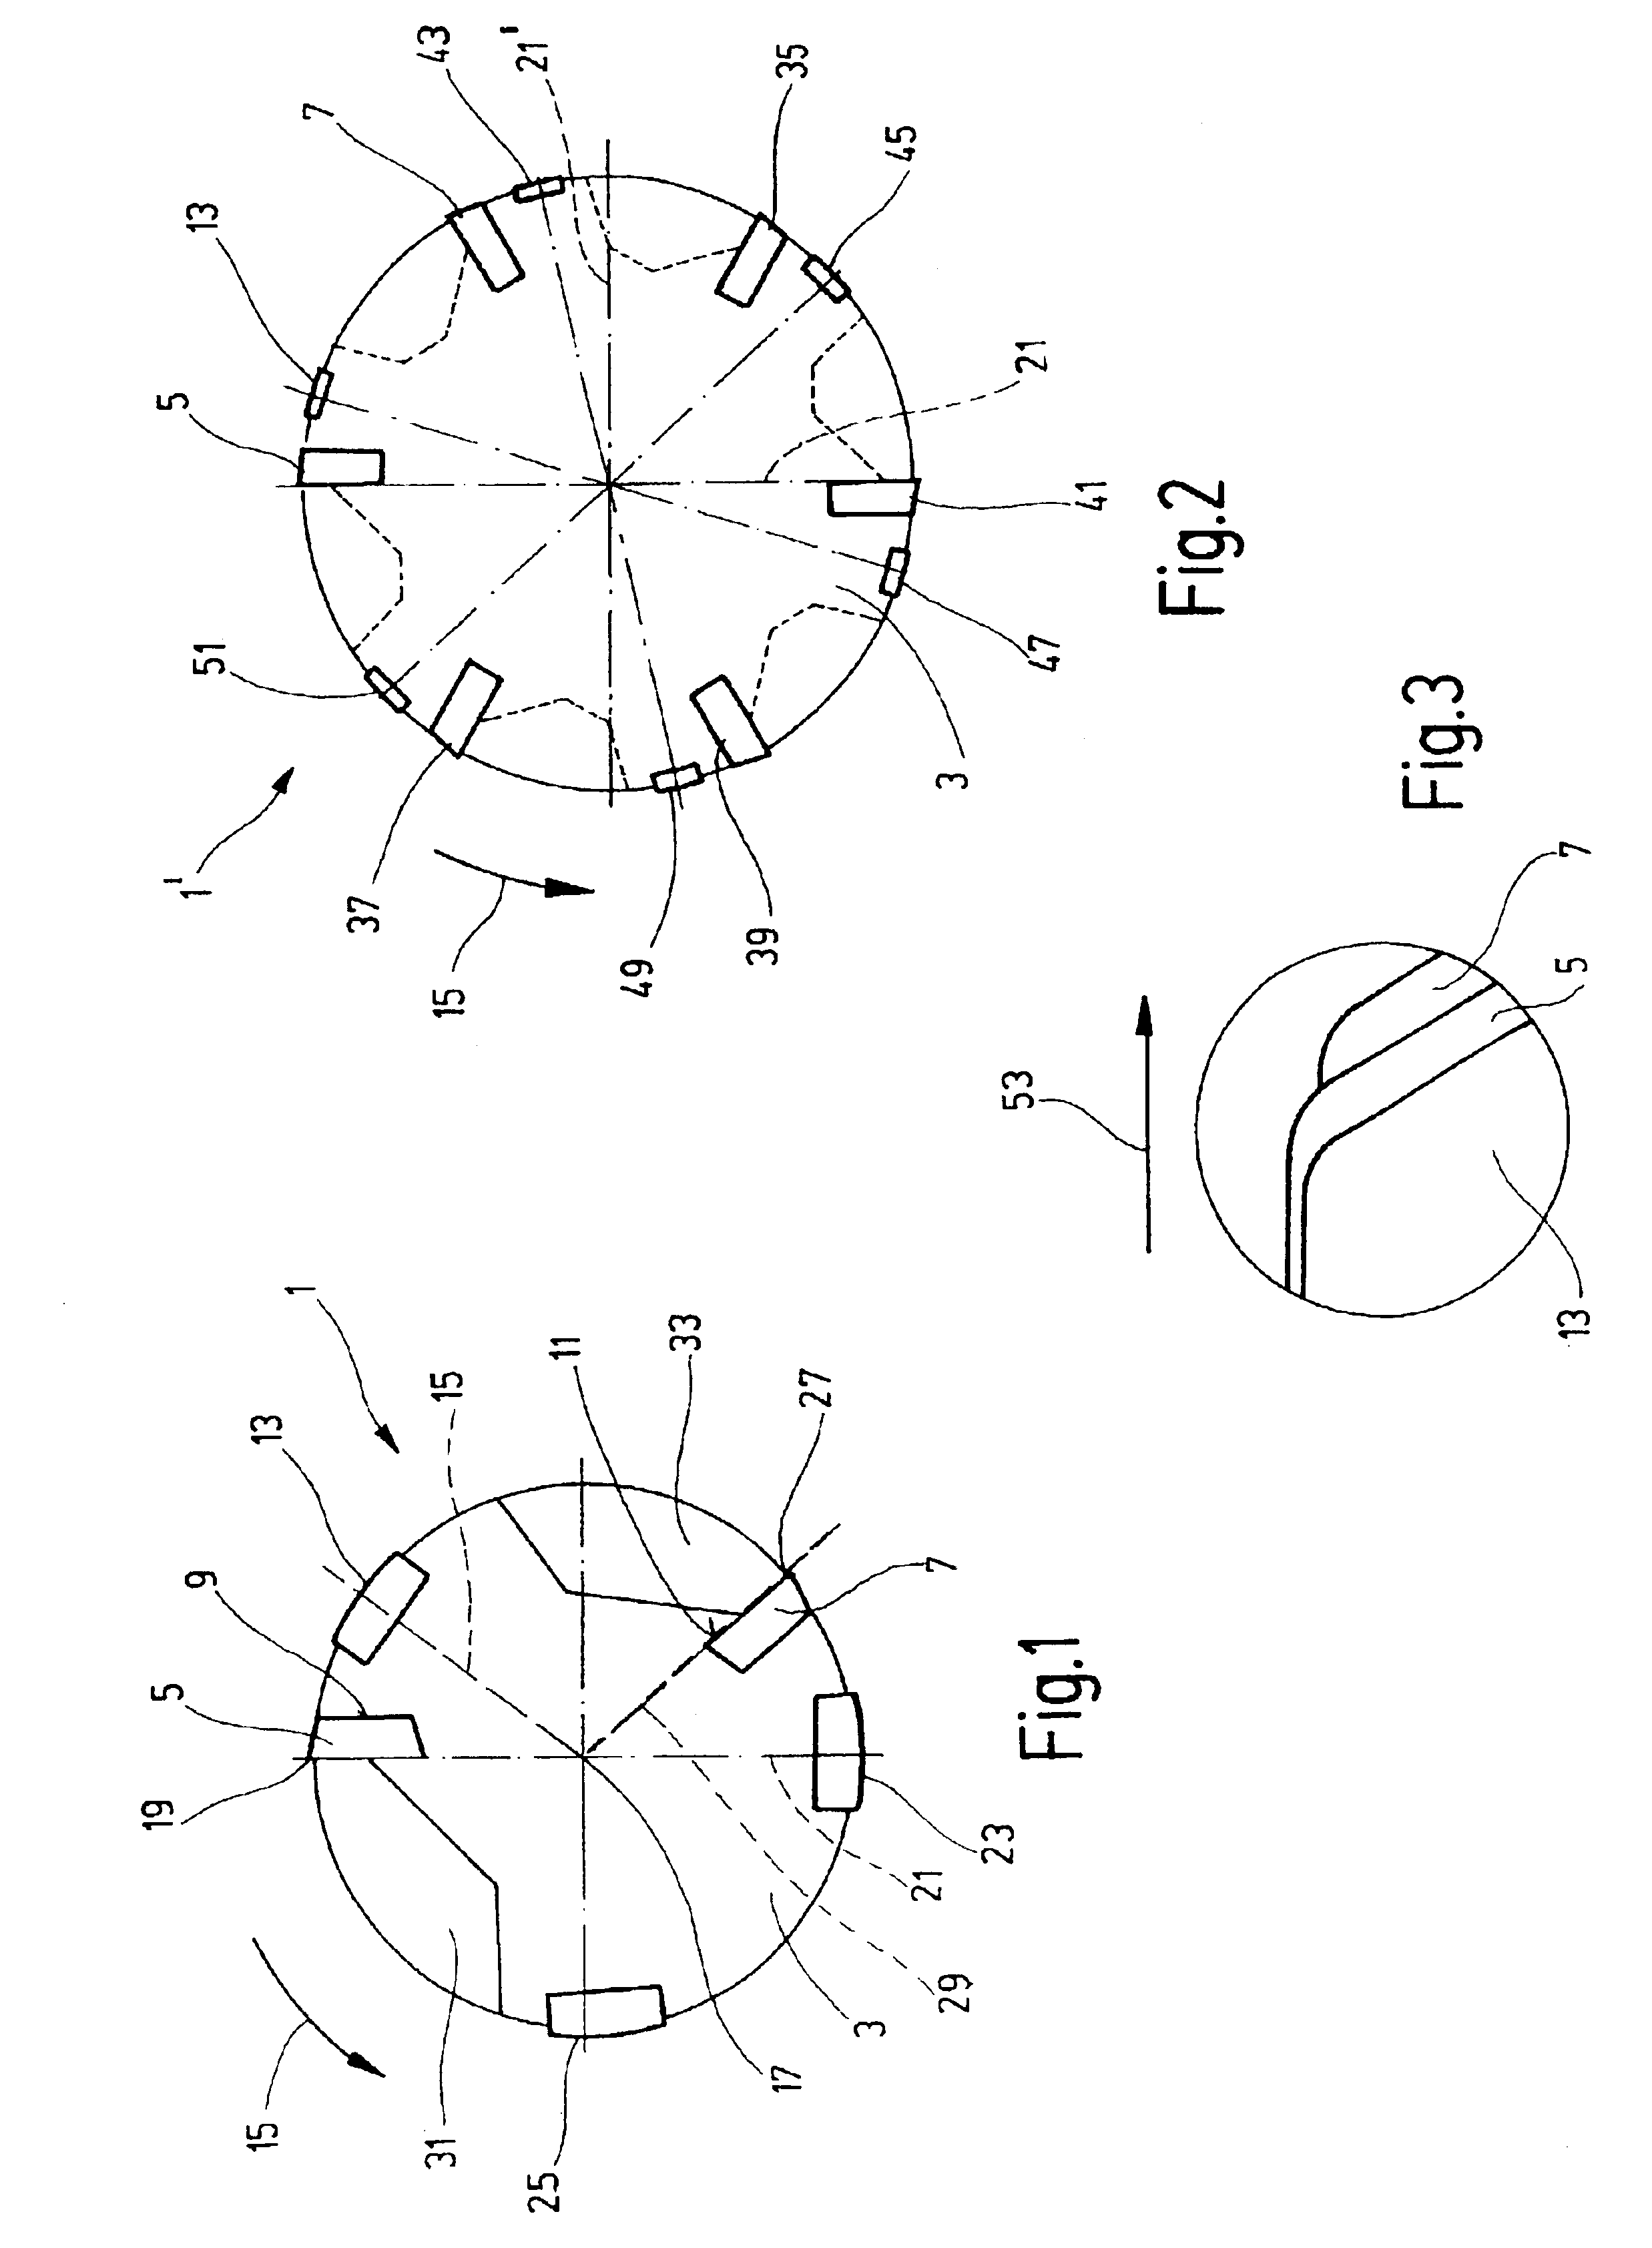 Tool for the precision machining of surfaces